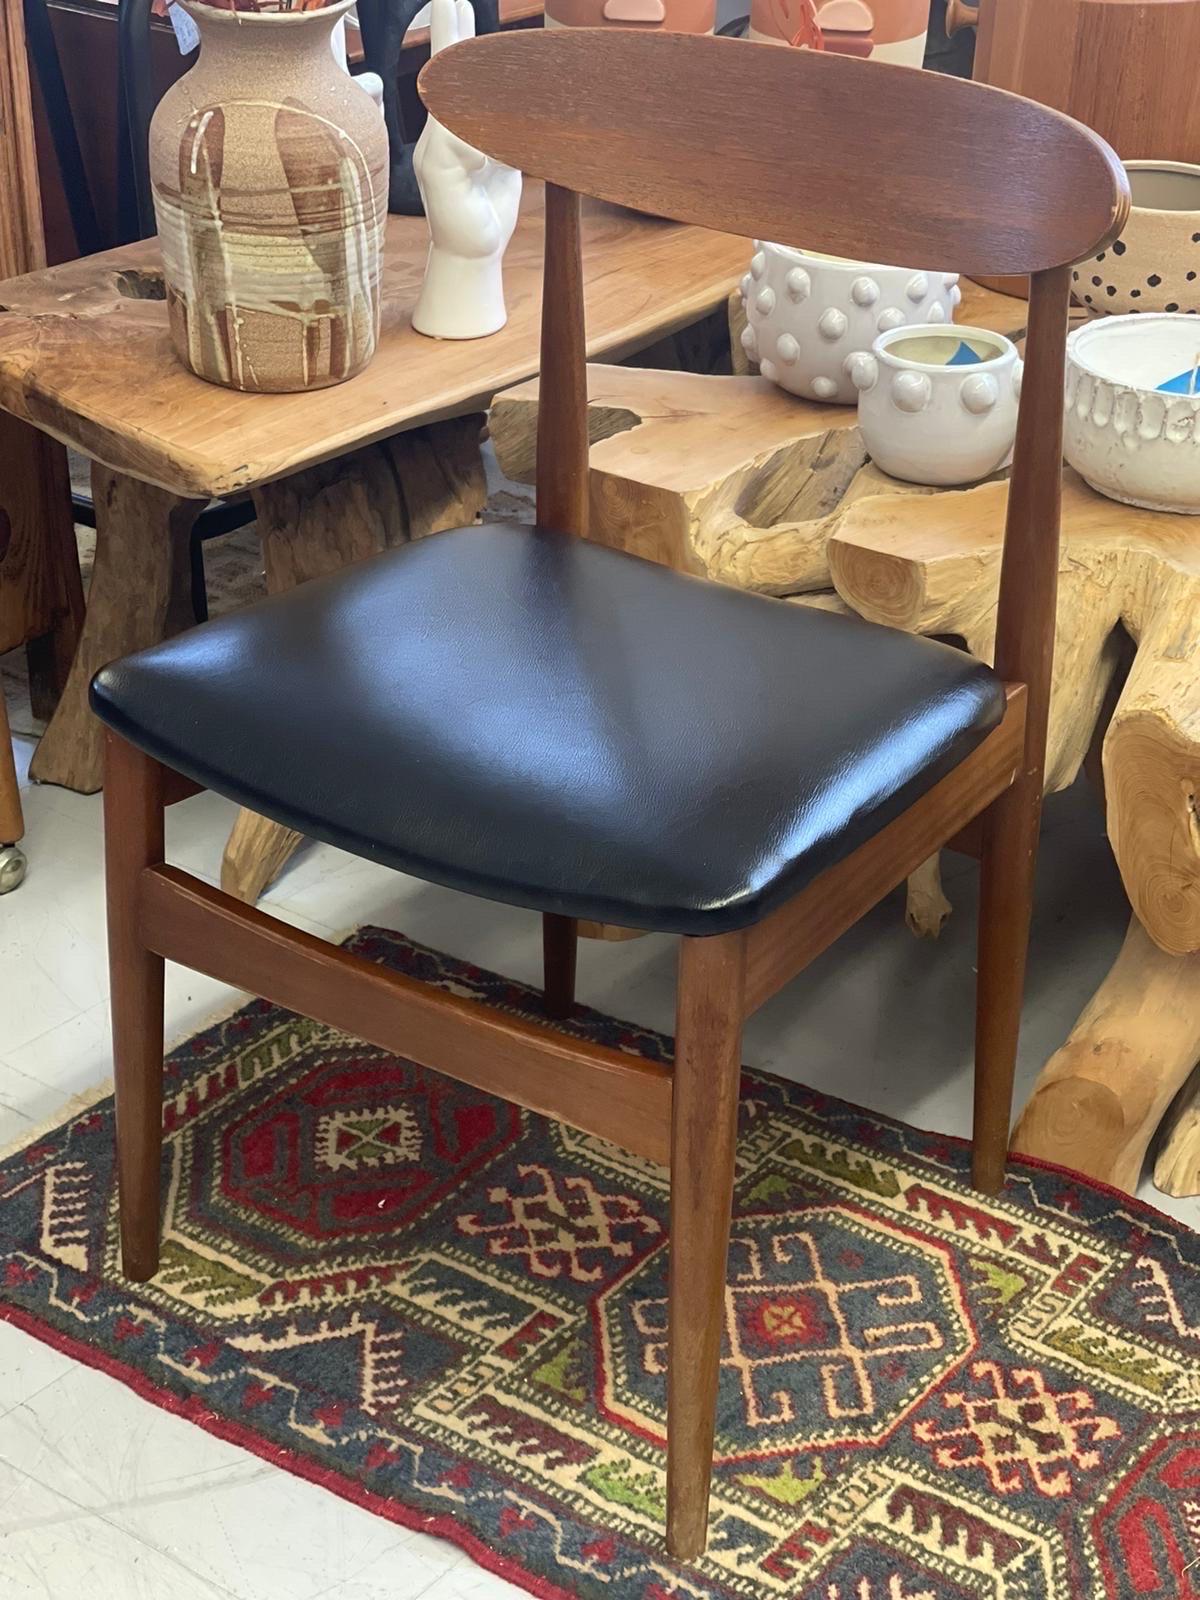 Late 20th Century Vintage Mid-Century Modern Chair For Sale